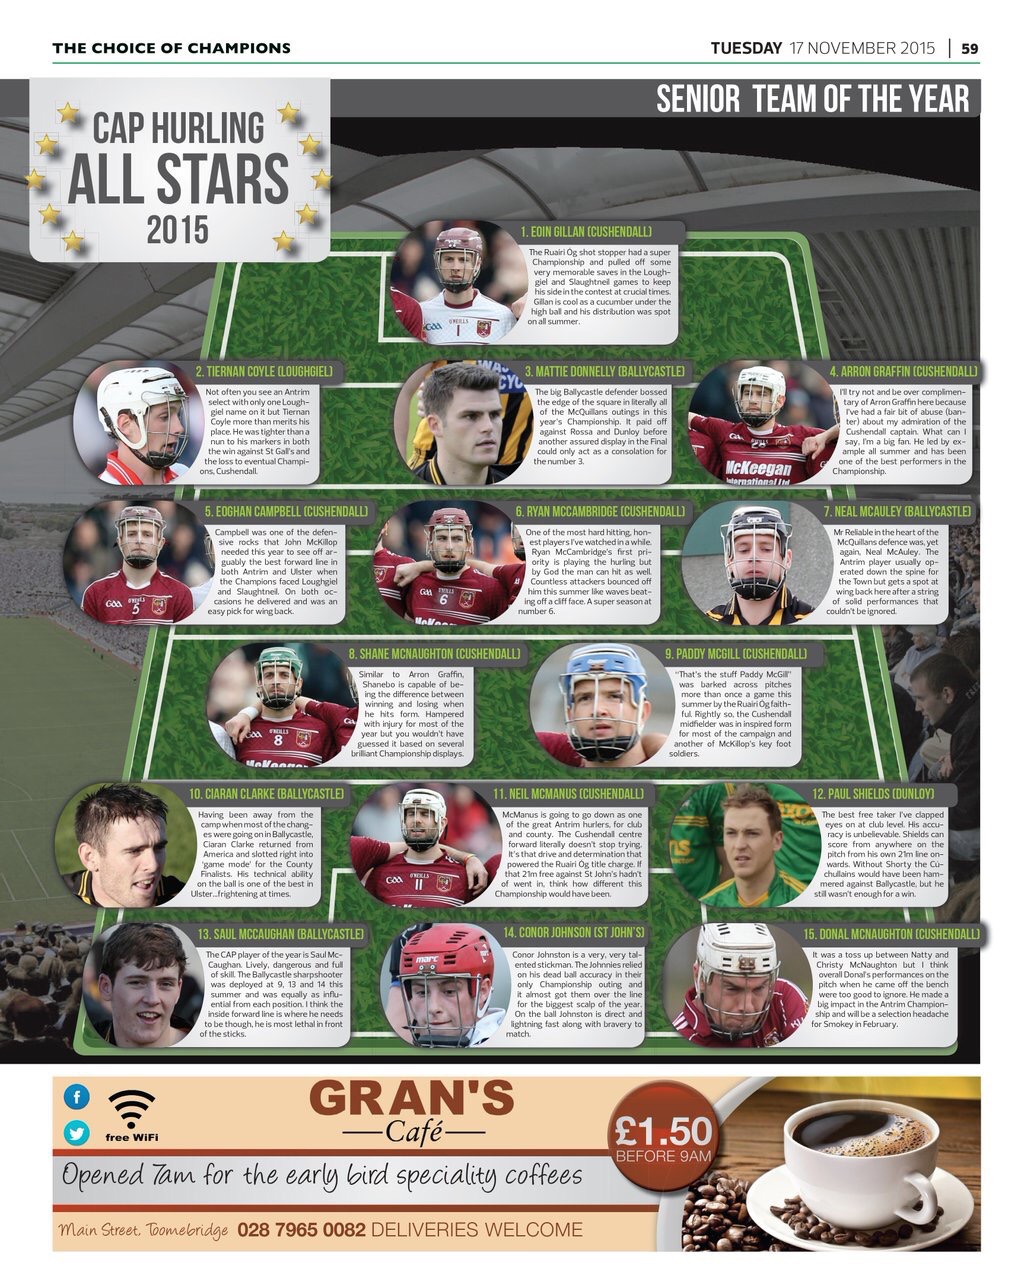 Matthew Donnelly, Neal McAuley, Ciaran Clarke and Saul McCaughan named in County Antrim Post’s Senior Hurling Championship team of the year 2015